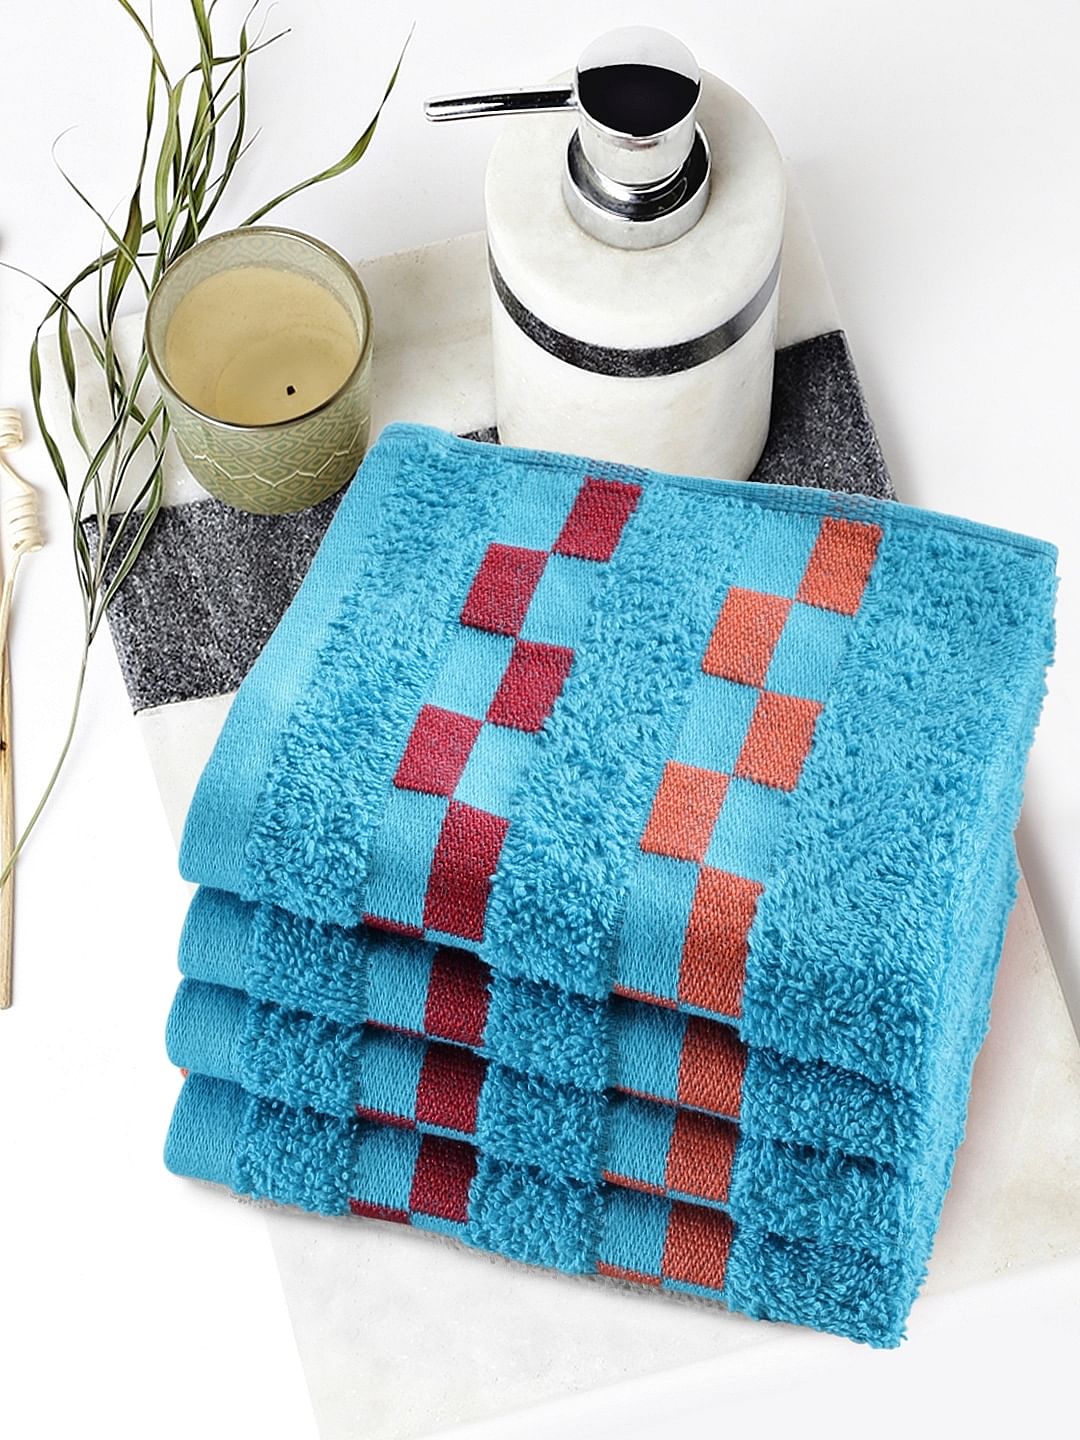 Sonoma Cotton Set Of 4 Face Towel 30X30 Cm in Teal Colour